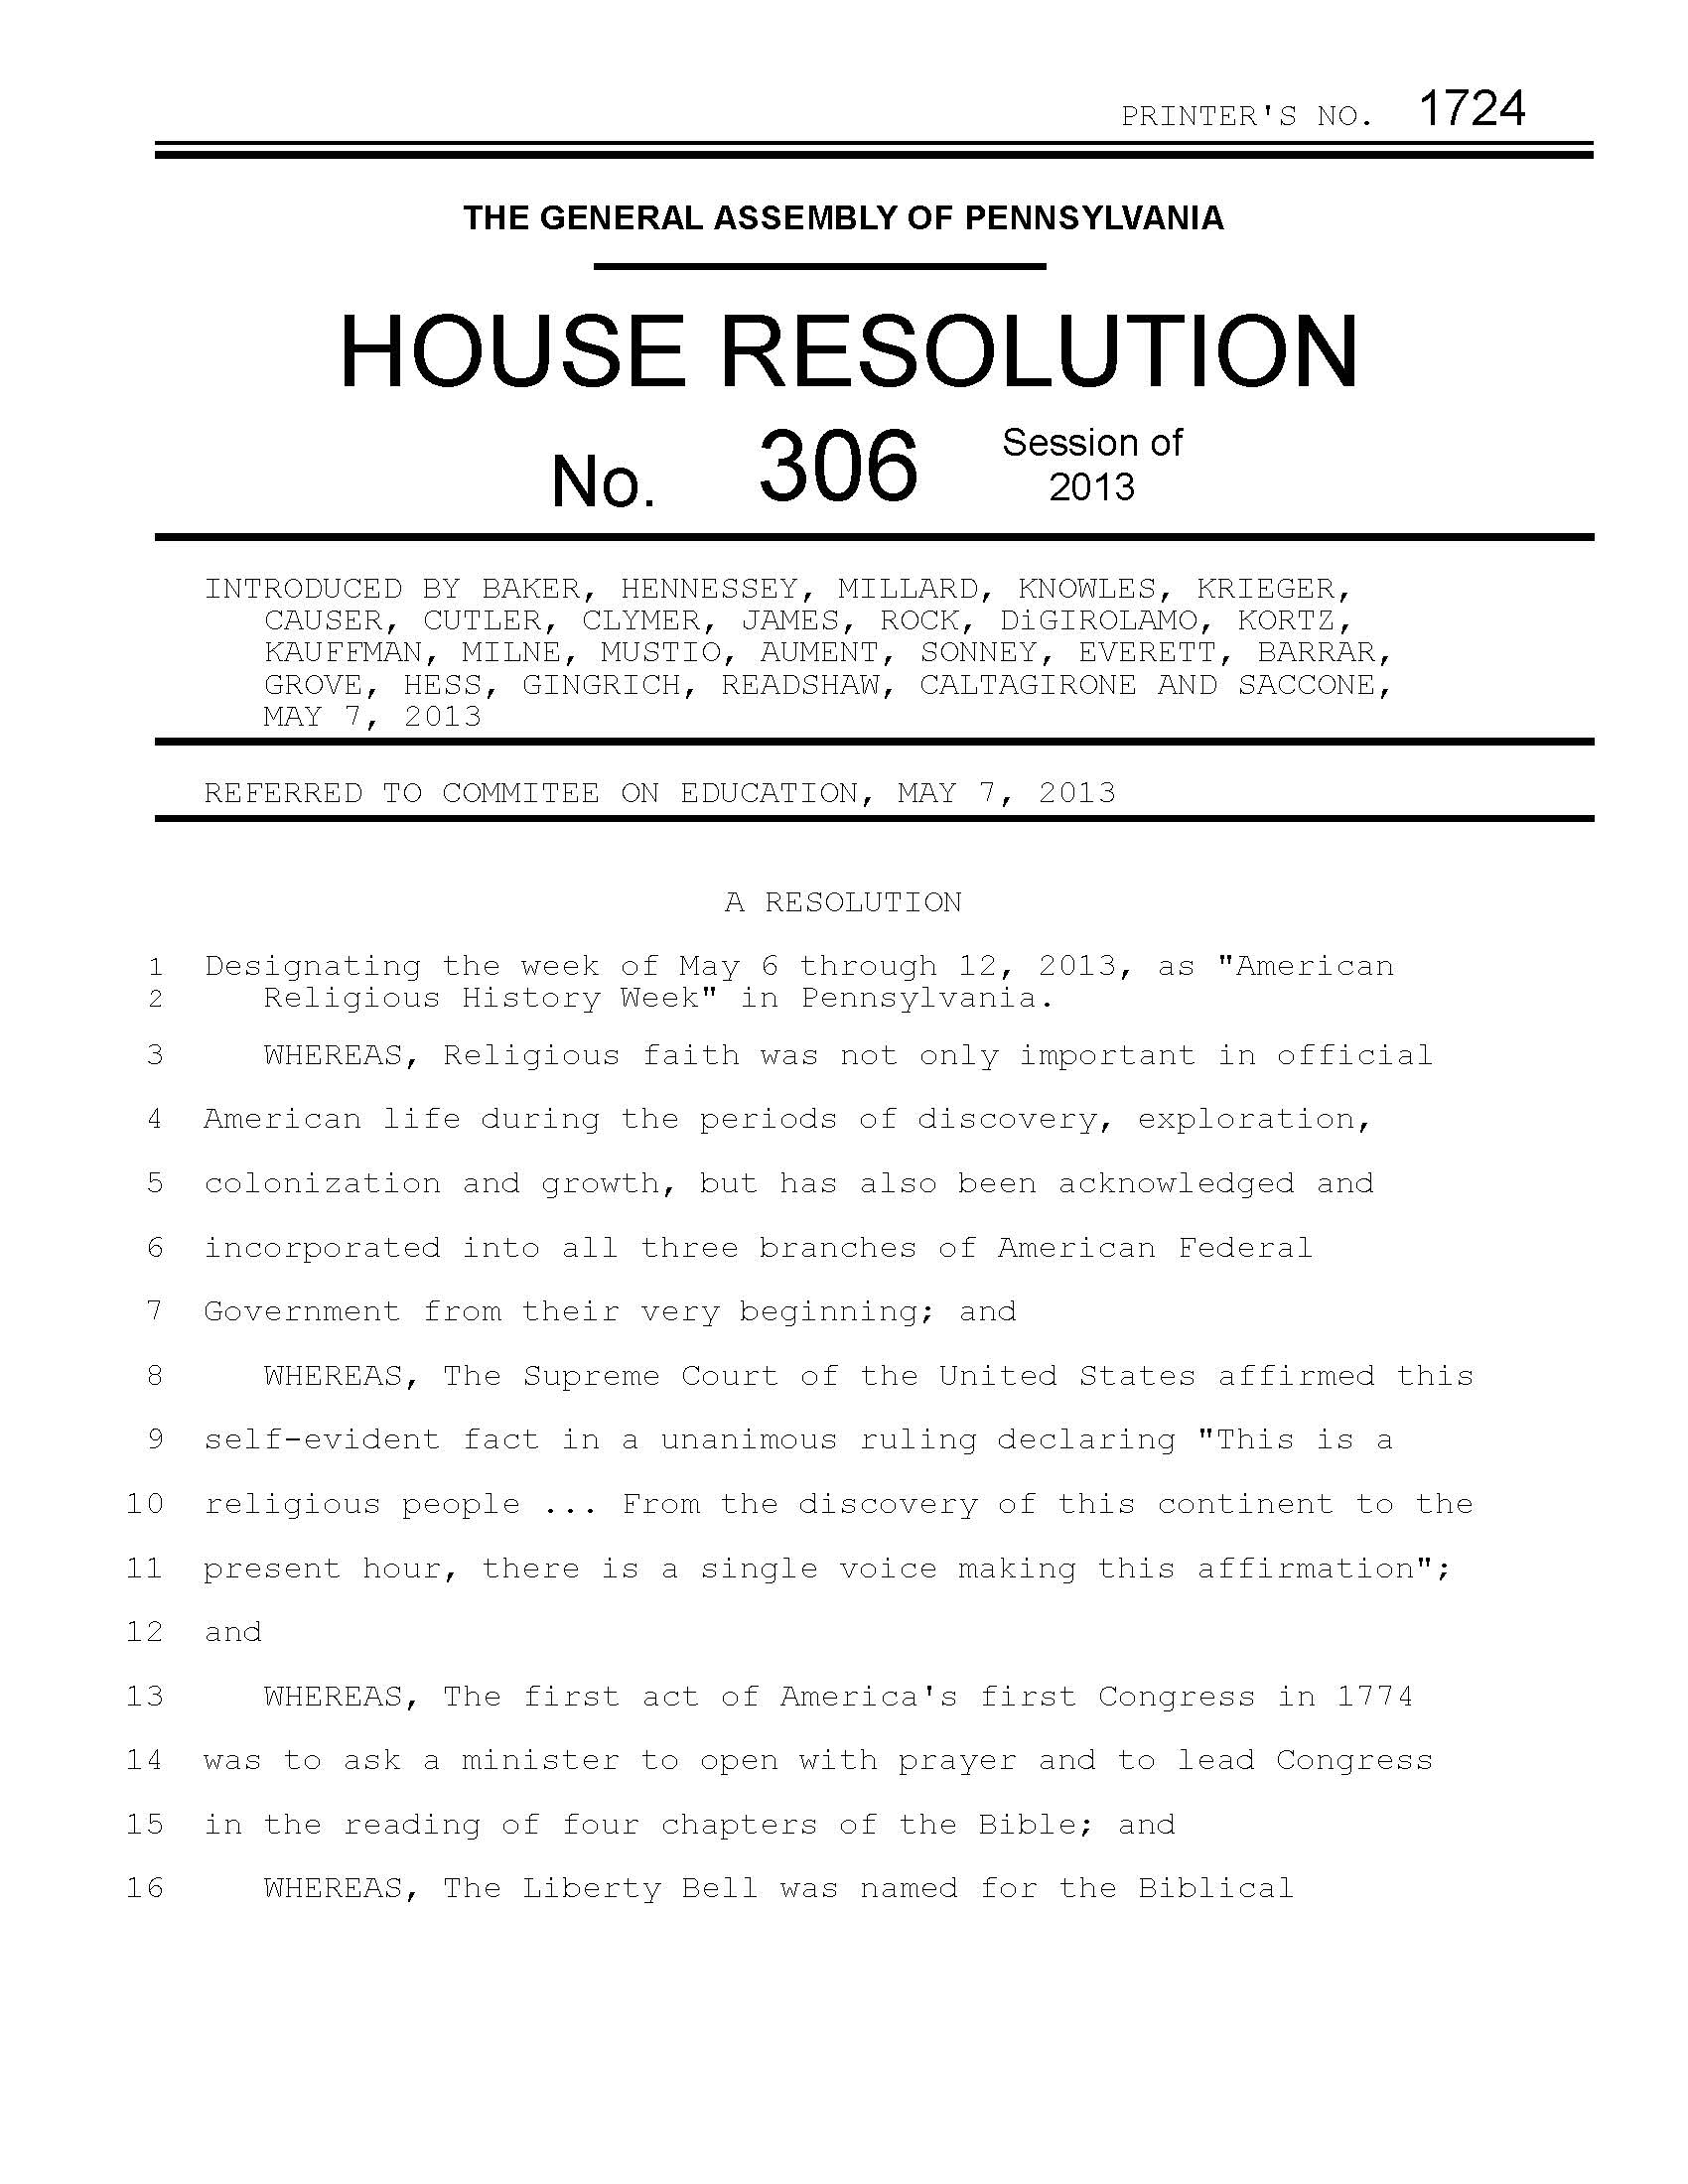 The first page of a bad bill.